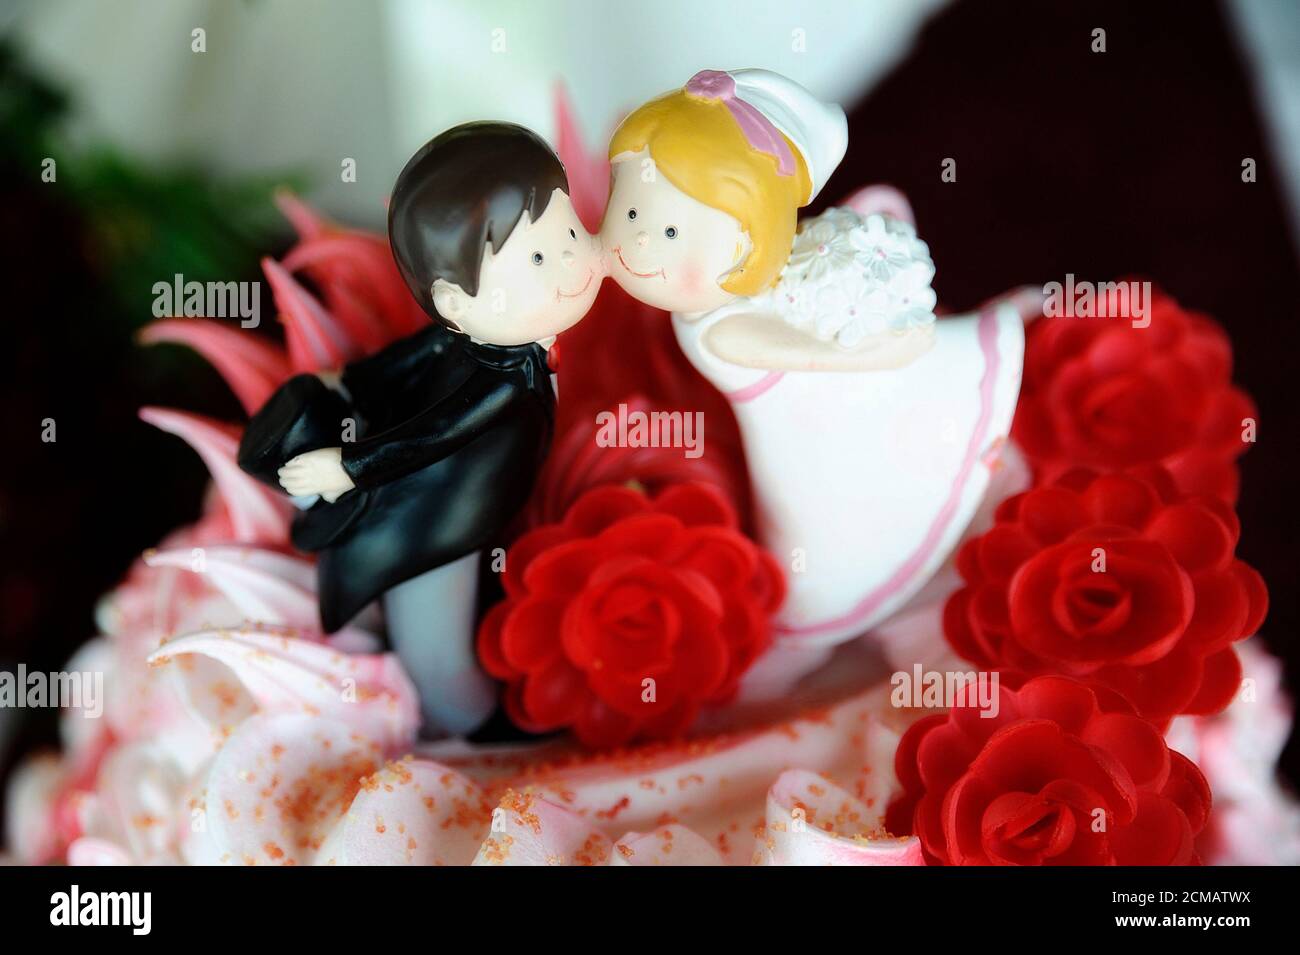 Cute wedding cake topper with bride and groom cheek to cheek or kissing, romantic addition to the colorful special cake, sweet and playful decoration Stock Photo